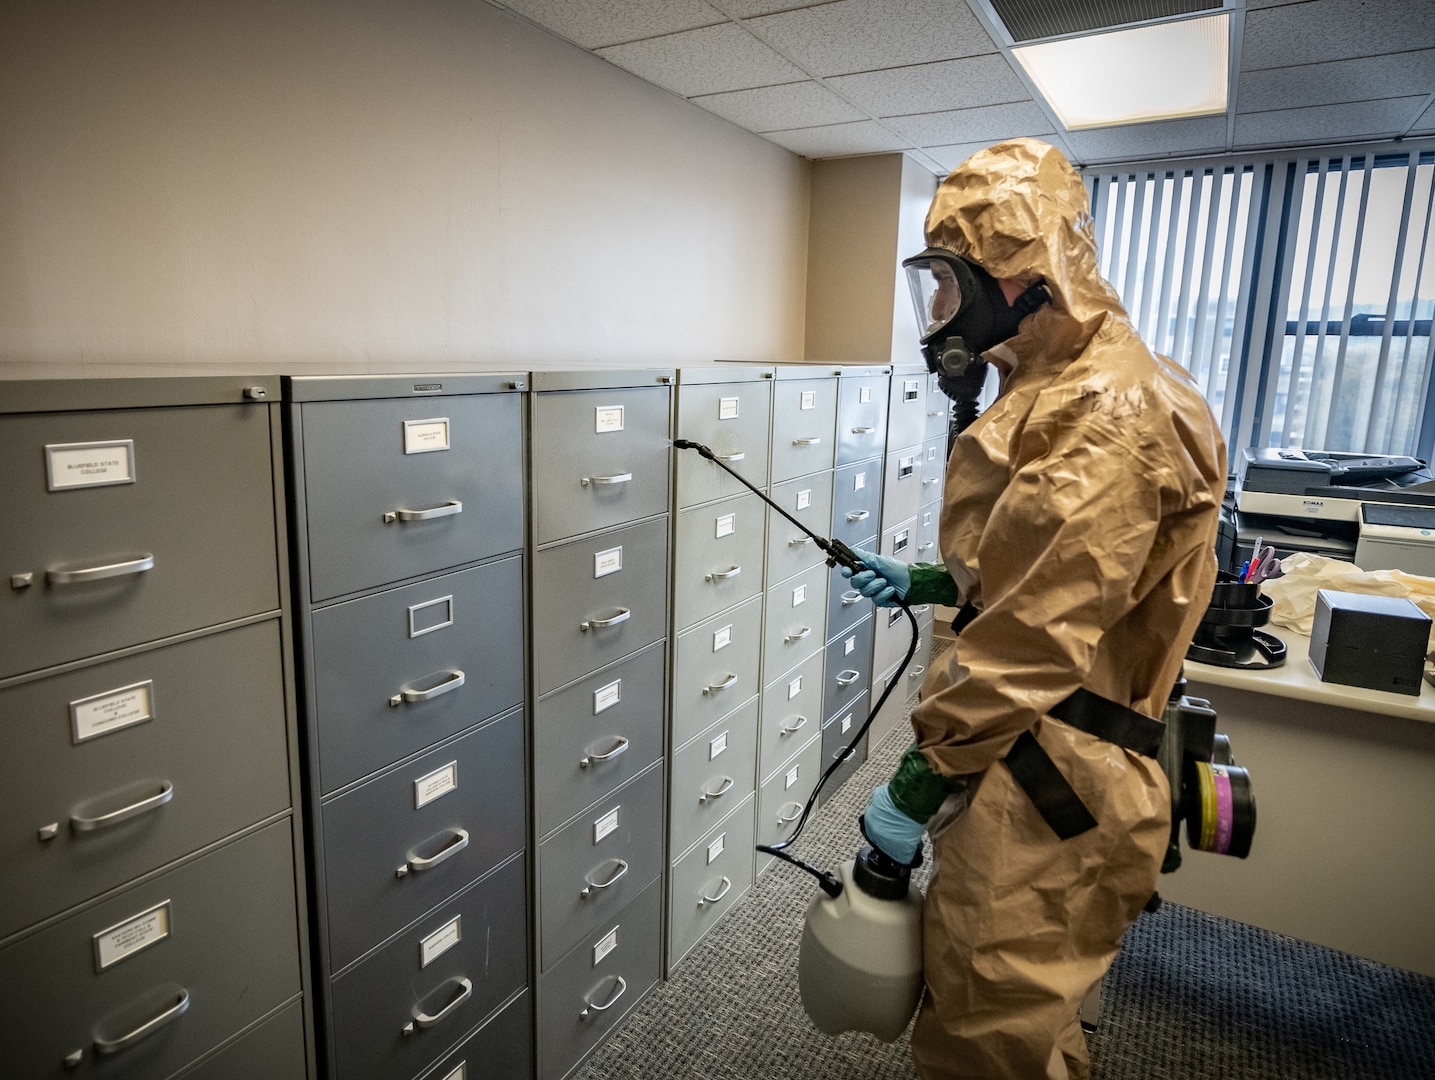 Members of the West Virginia National Guard’s Task Force Chemical, Biological, Radiological and Nuclear Response Enterprise sanitize workspaces for the West Virginia Higher Education Policy Commission in Charleston, West Virginia, April 11, 2020.